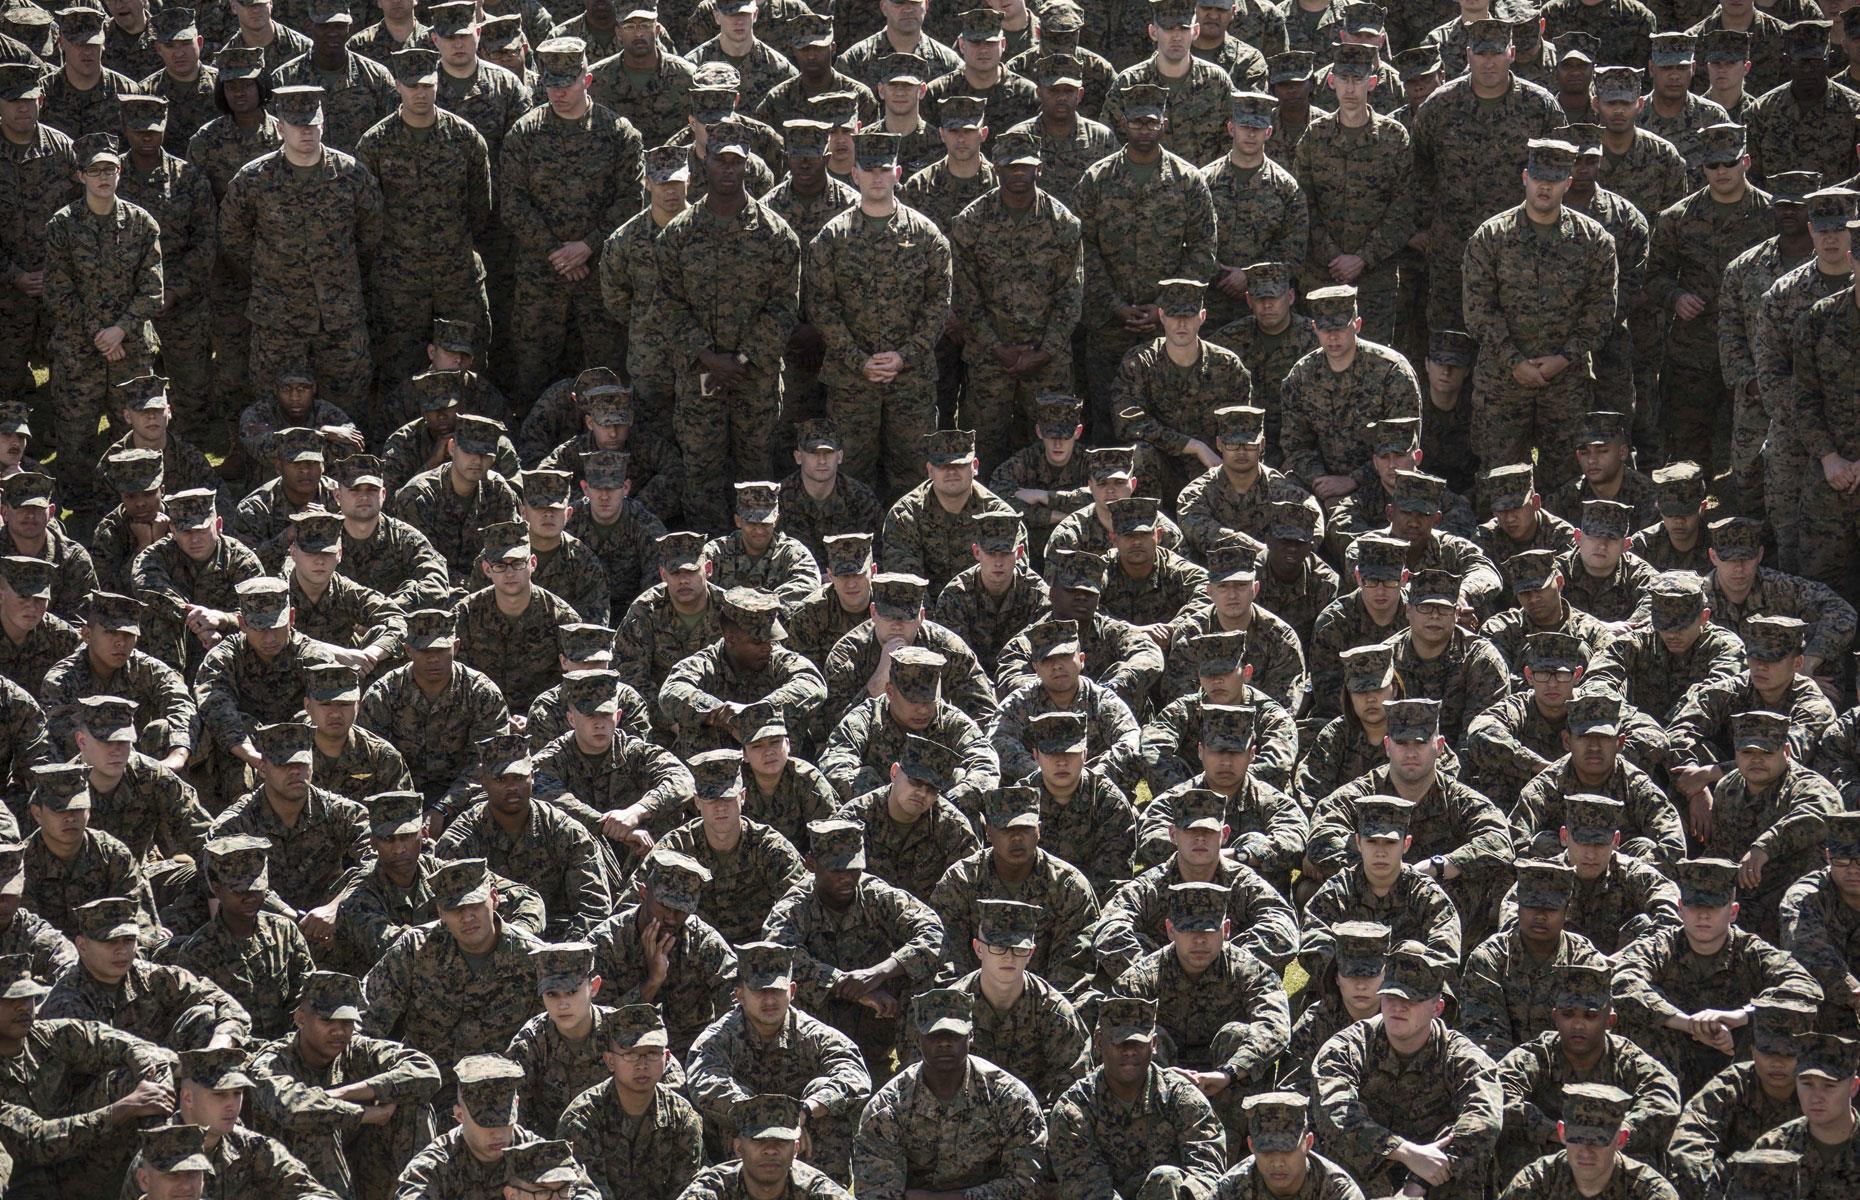 The US military has 1.3 million active personnel and 811,000 reservists